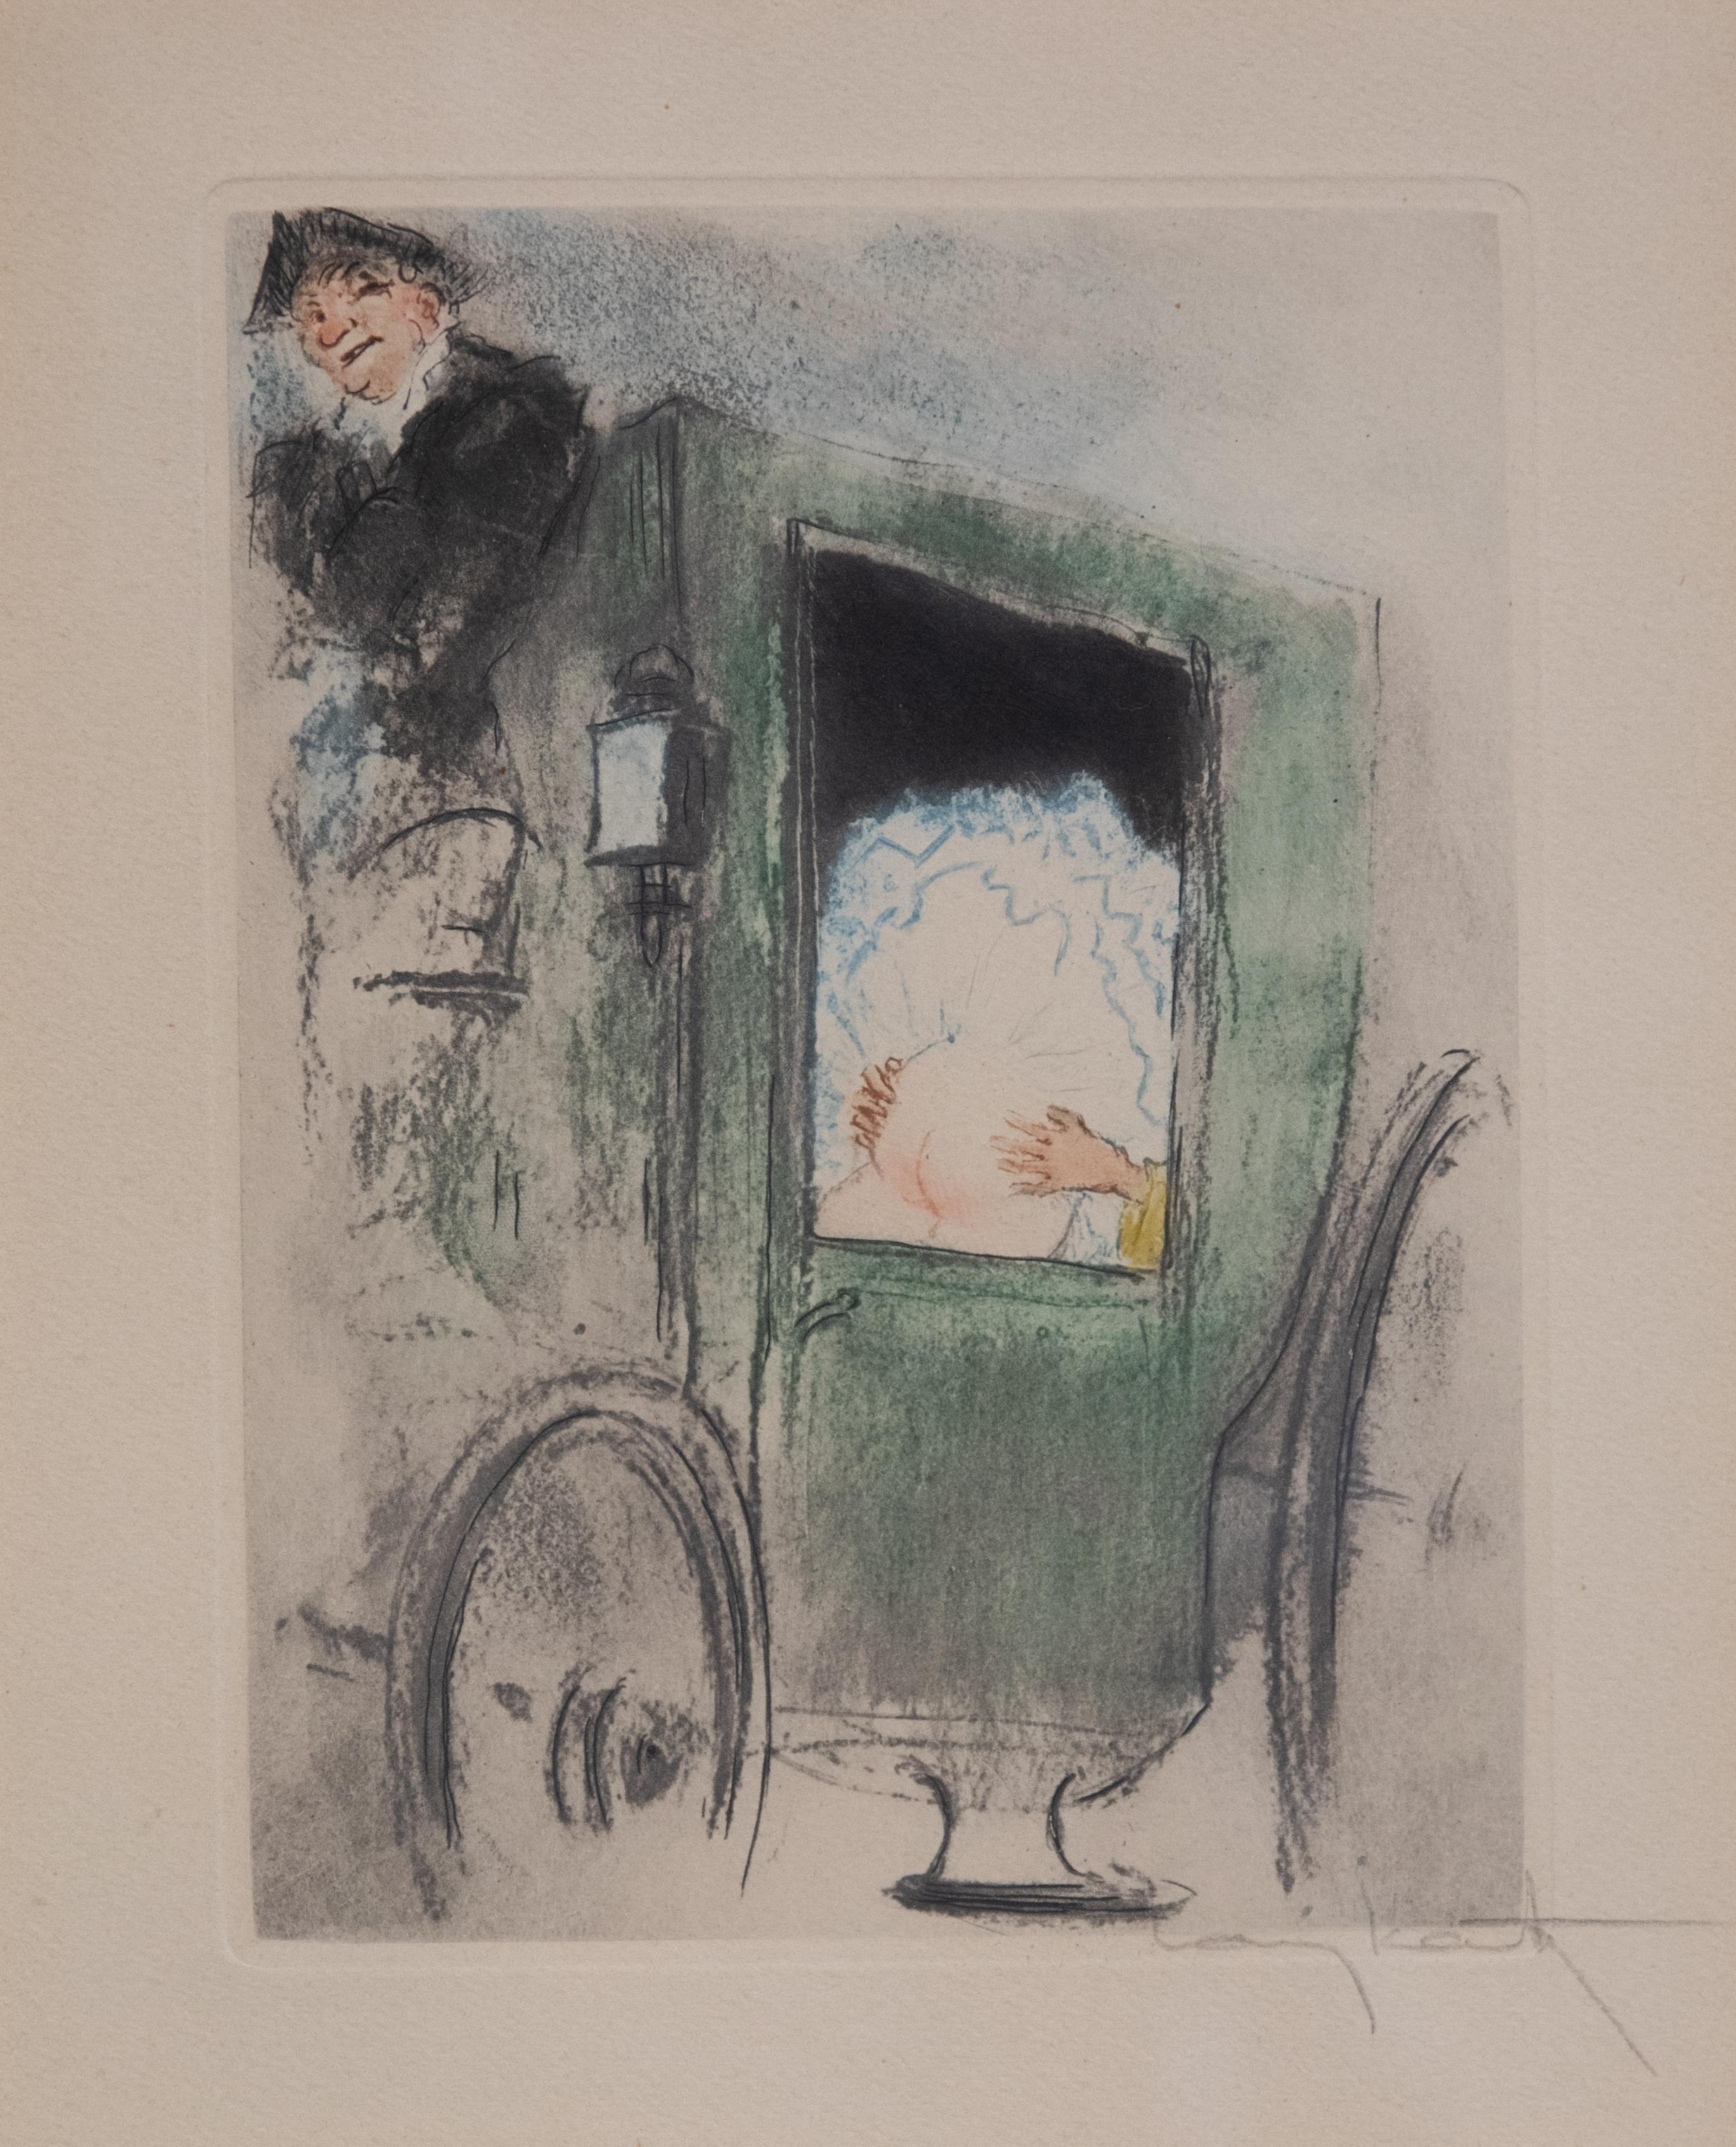 In the coach from Felicia written by Andrea de Nerciat, ou Mes Fredaines signed Louis Icart in pencil. Art Deco, a term coined at the 1925 Paris Exposition des Arts Decoratifs, had taken its grip on the Paris of the 1920s. By the late 1920s Icart,